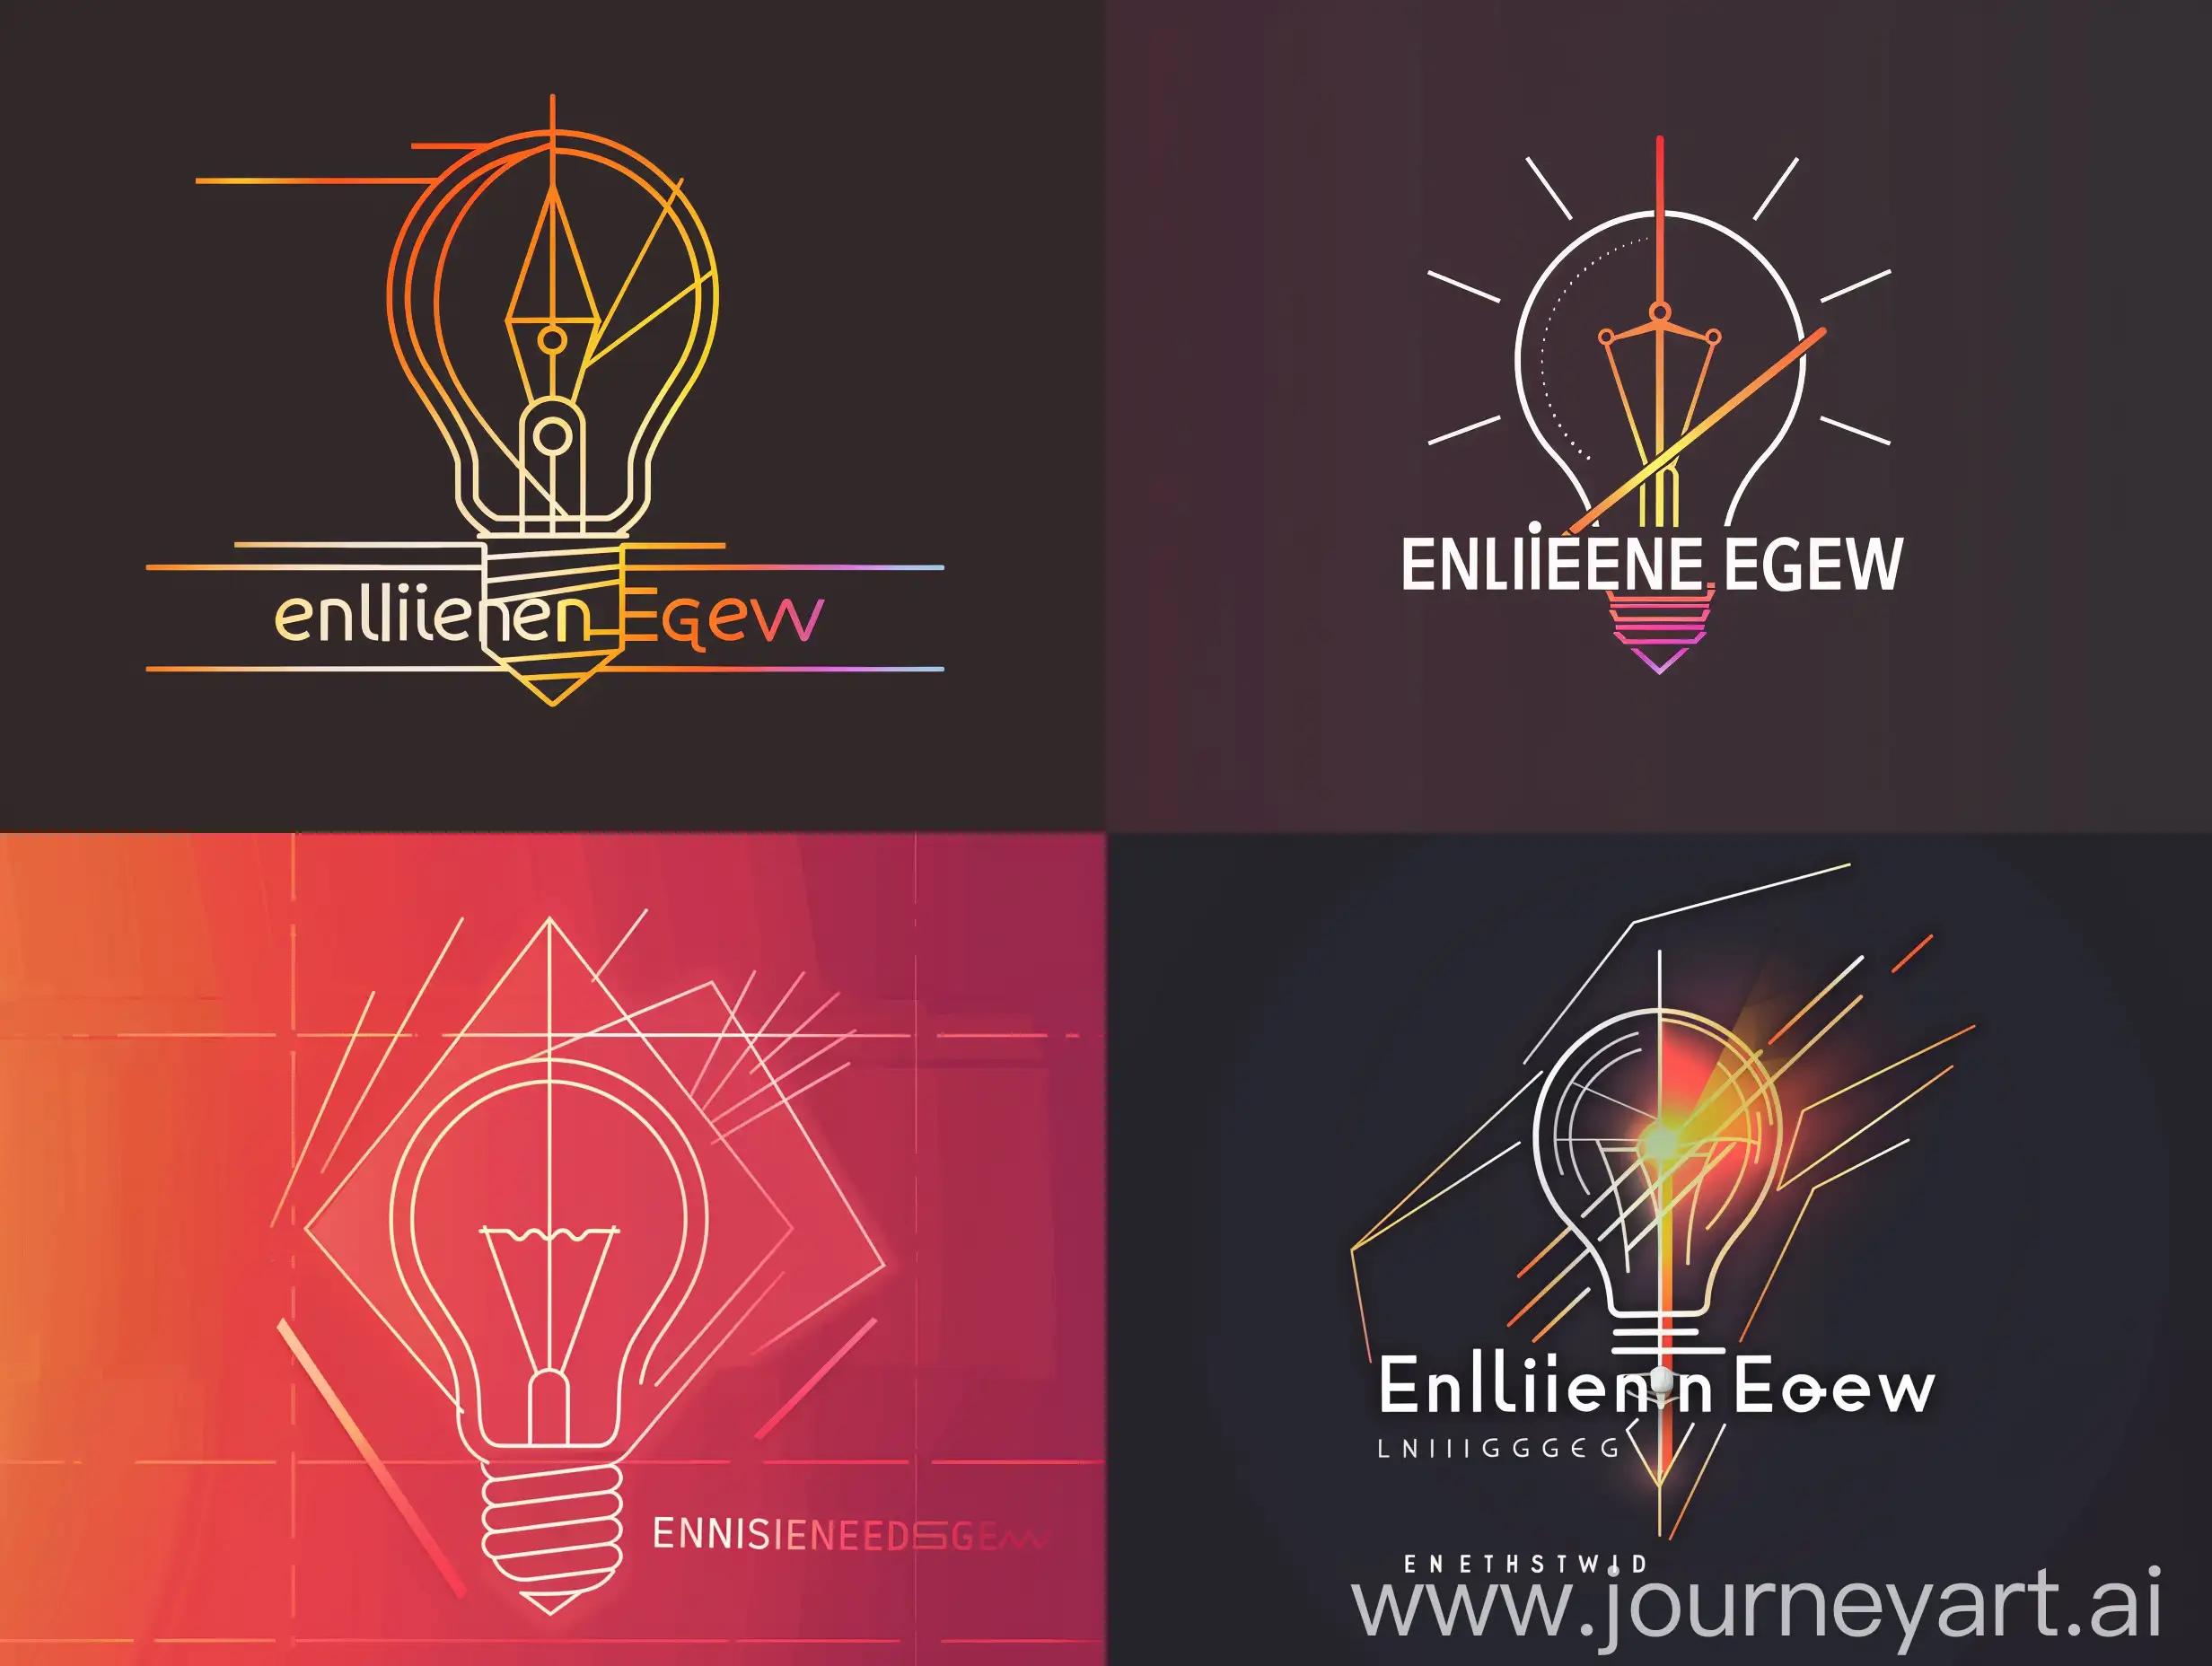 EnlightenEdge name Create a sleek, minimalist logo featuring a lightbulb (symbolizing enlightenment) with a sharp, modern edge or outline. You could incorporate geometric shapes or lines to represent the innovative aspect of the channel. Additionally, using gradient colors or subtle shading can add depth and visual interest to the logo.